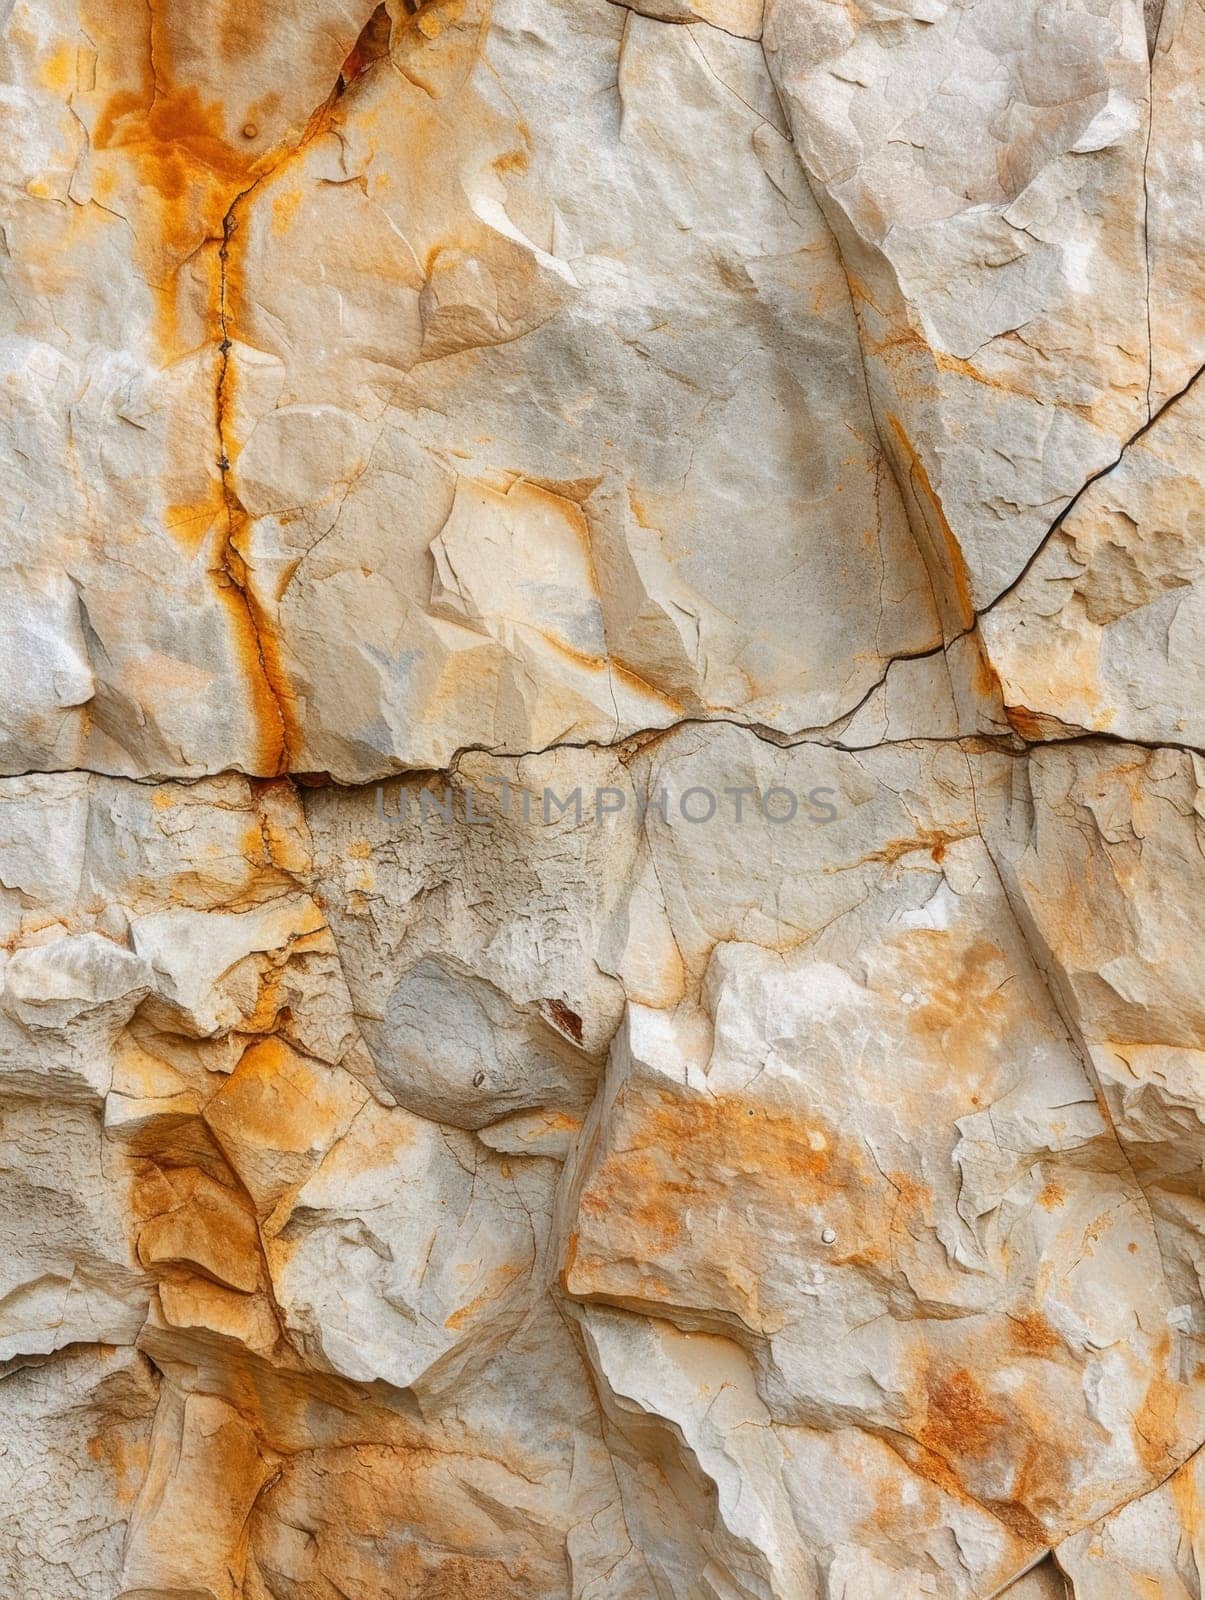 Close-up view of a multicolored rock surface showcasing natural textures and patterns